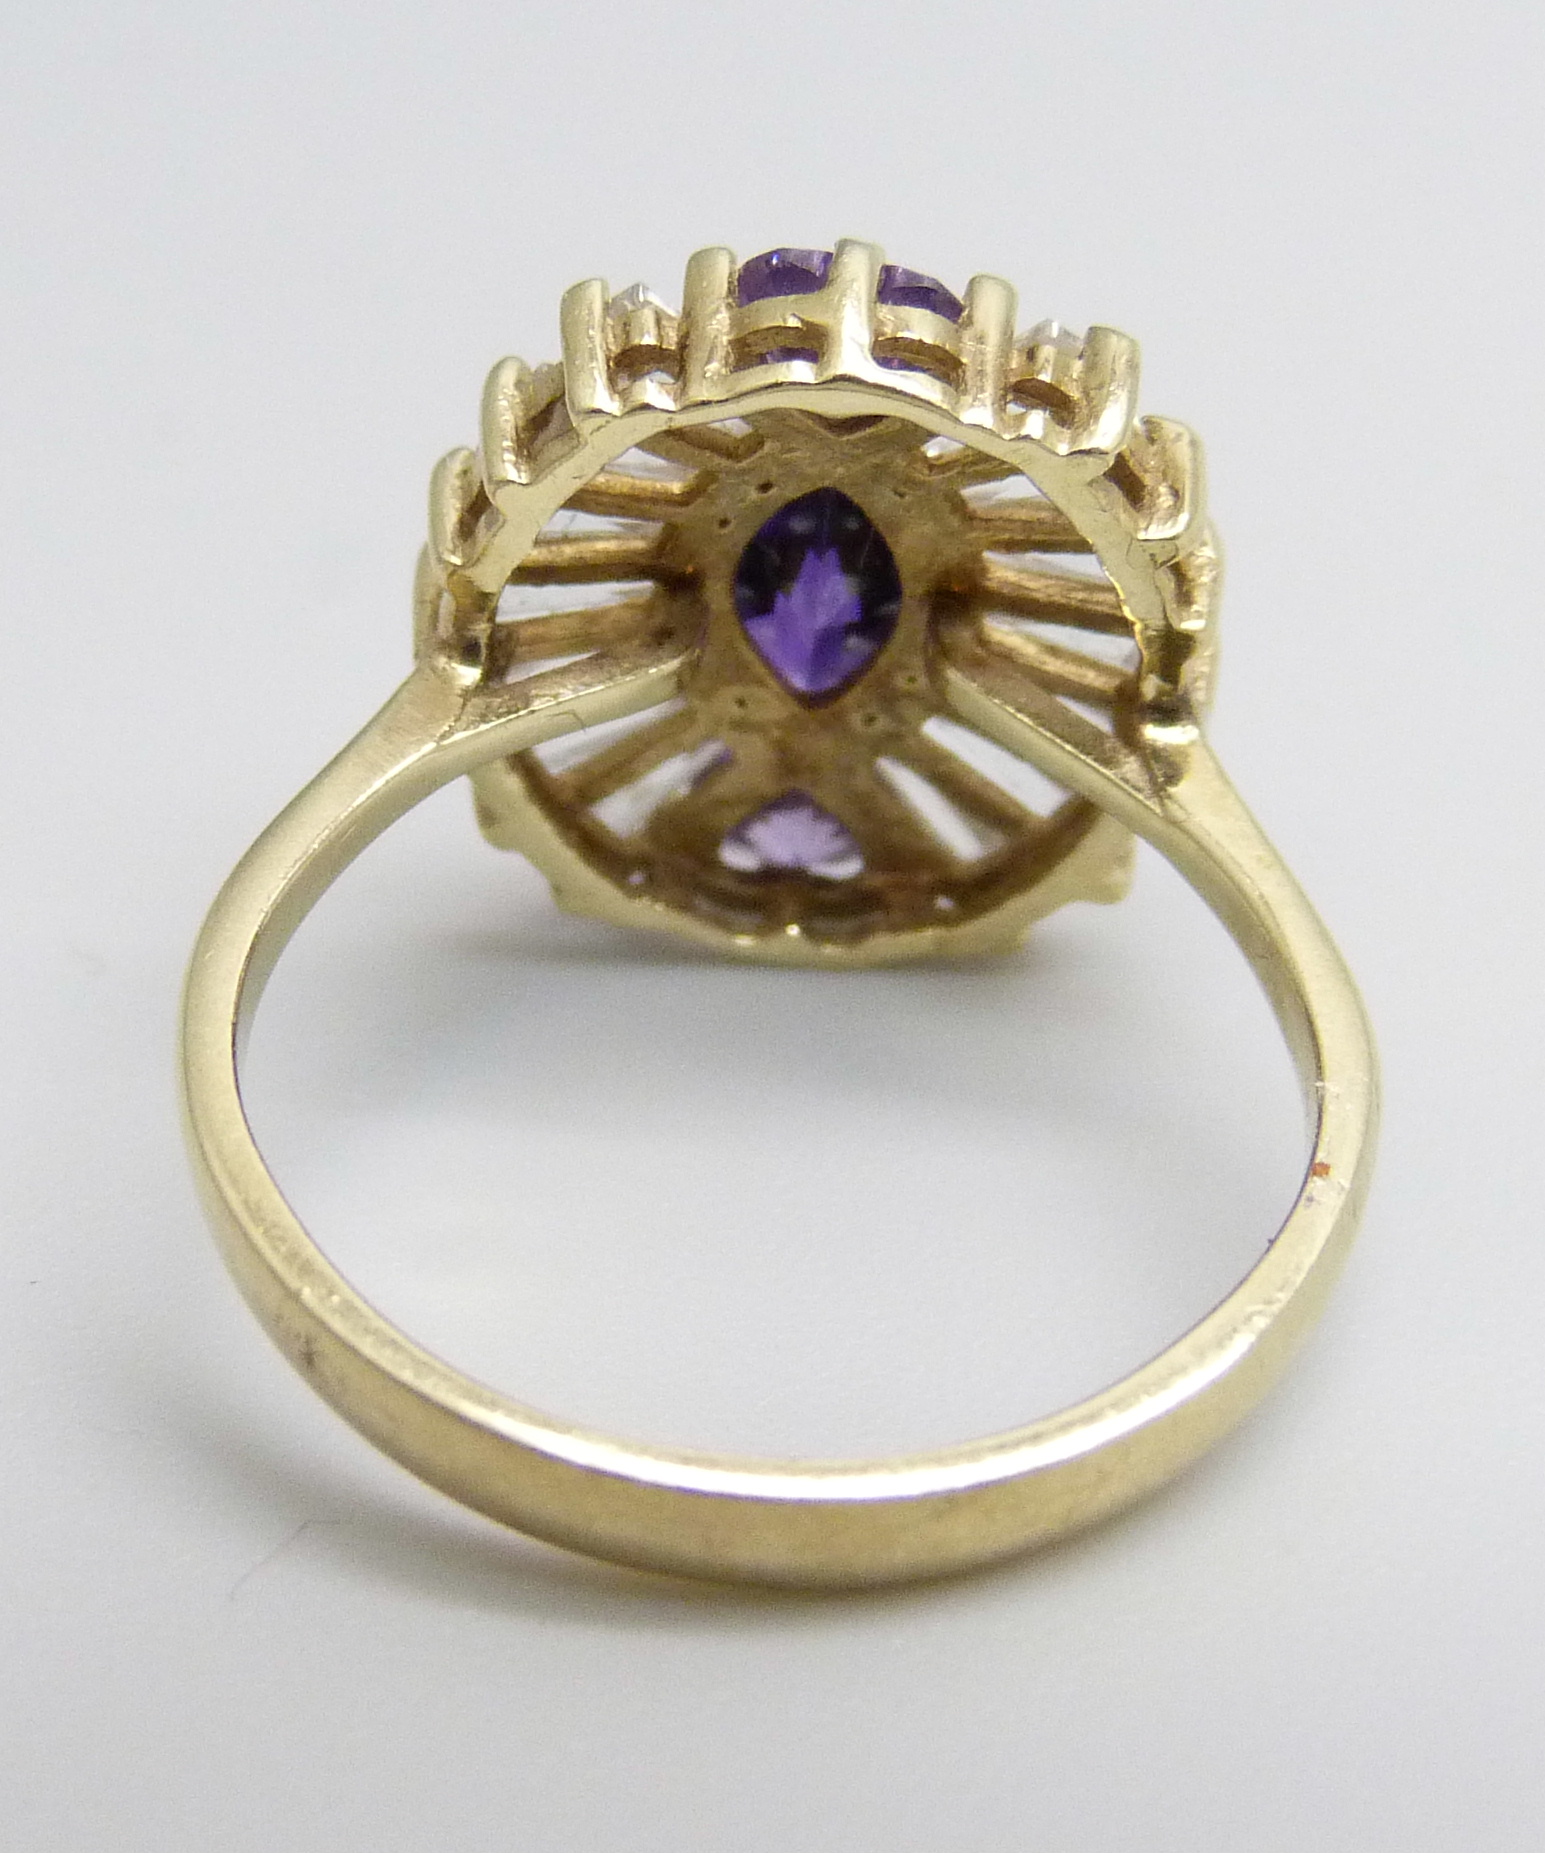 A 9ct gold, white and amethyst stone Art Deco style ring, 3.4g, L - Image 3 of 3